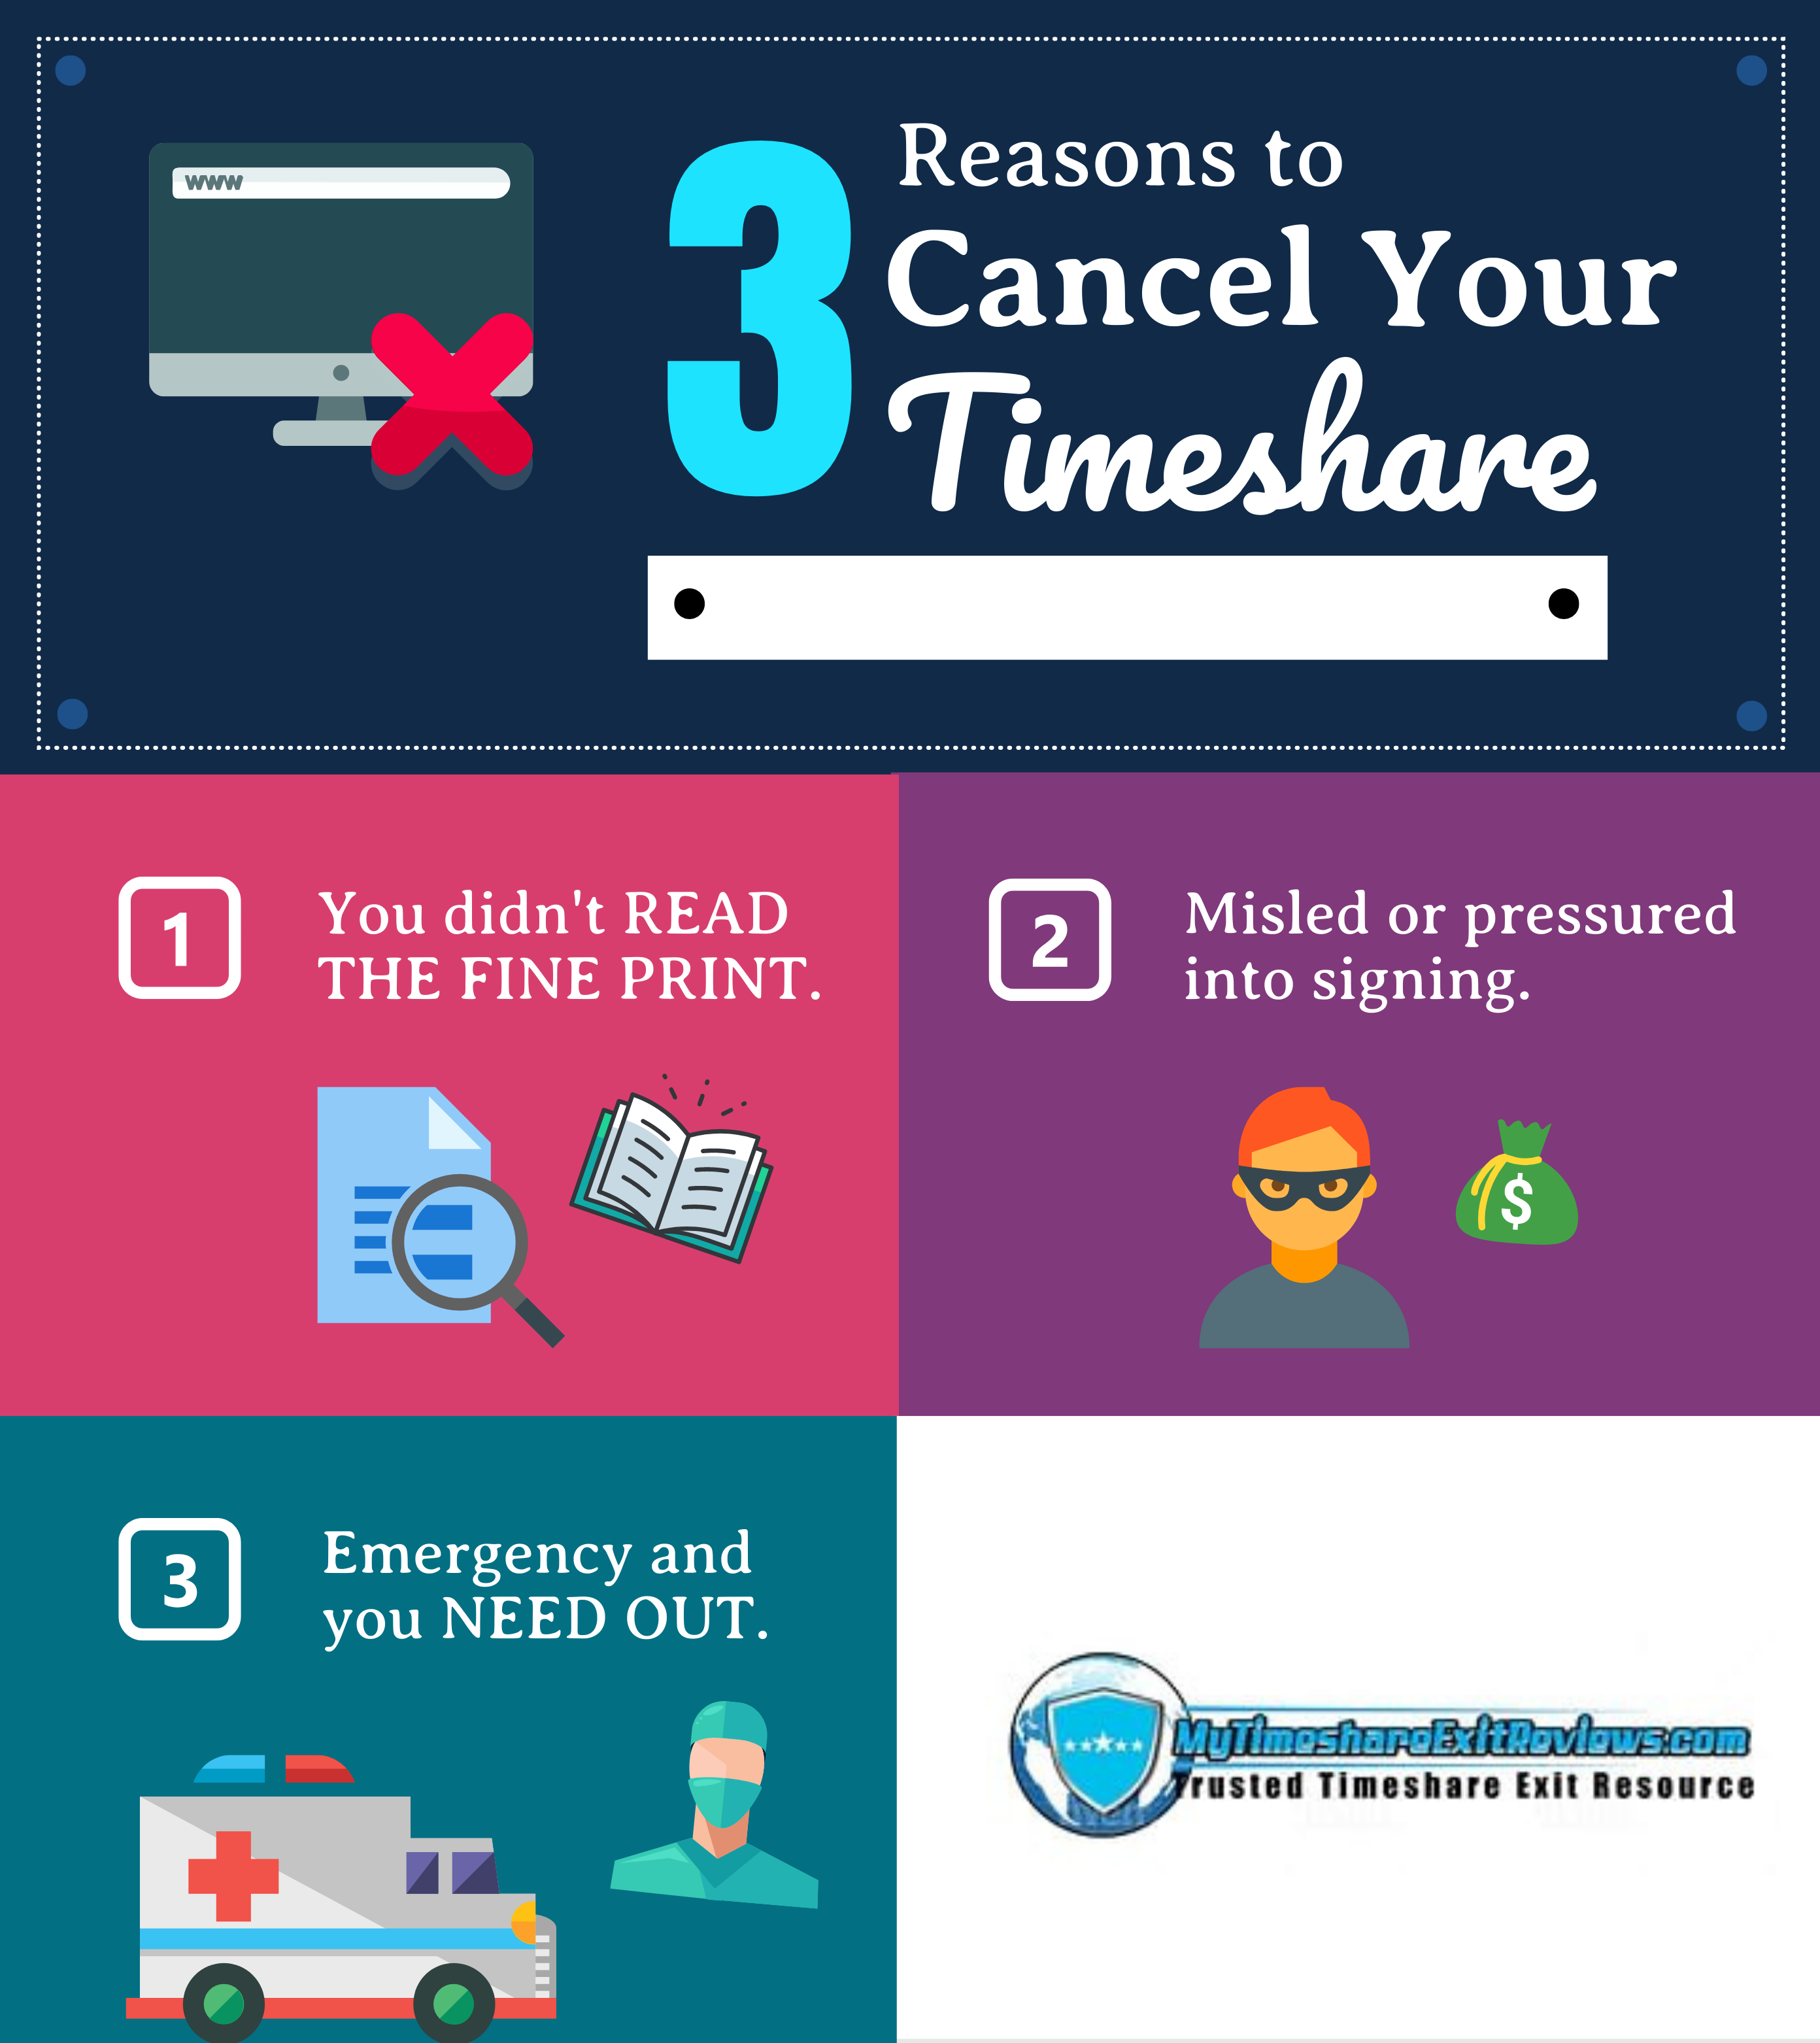 how to get out of a timeshare presentation fast